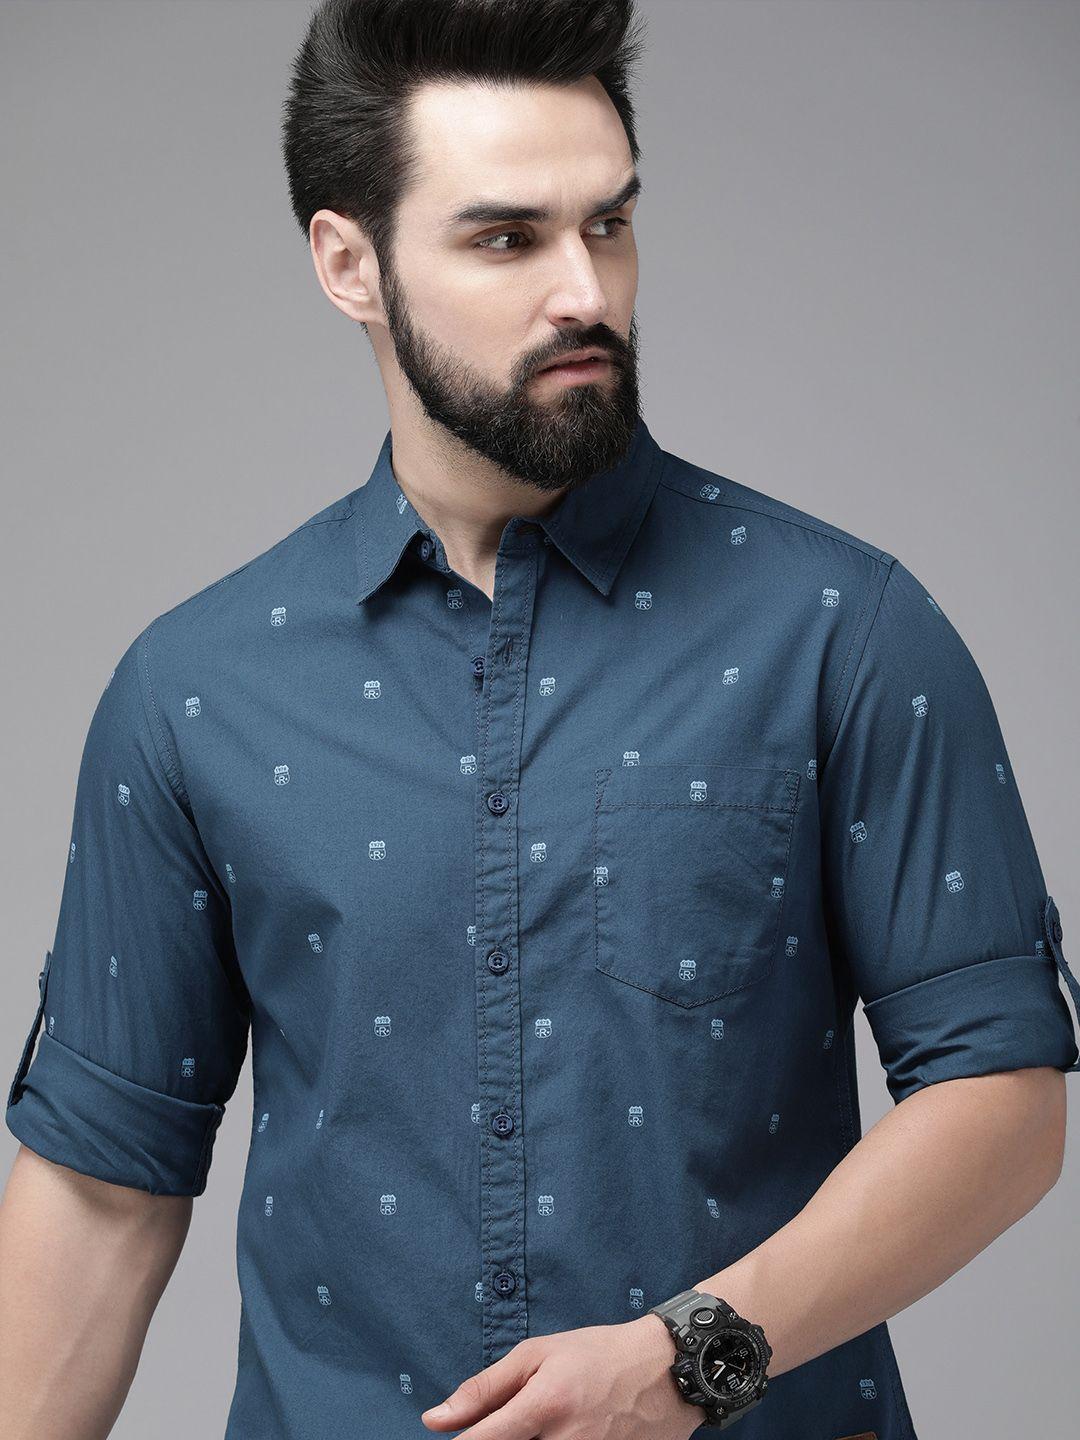 the roadster lifestyle co. men pure cotton brand logo printed casual shirt